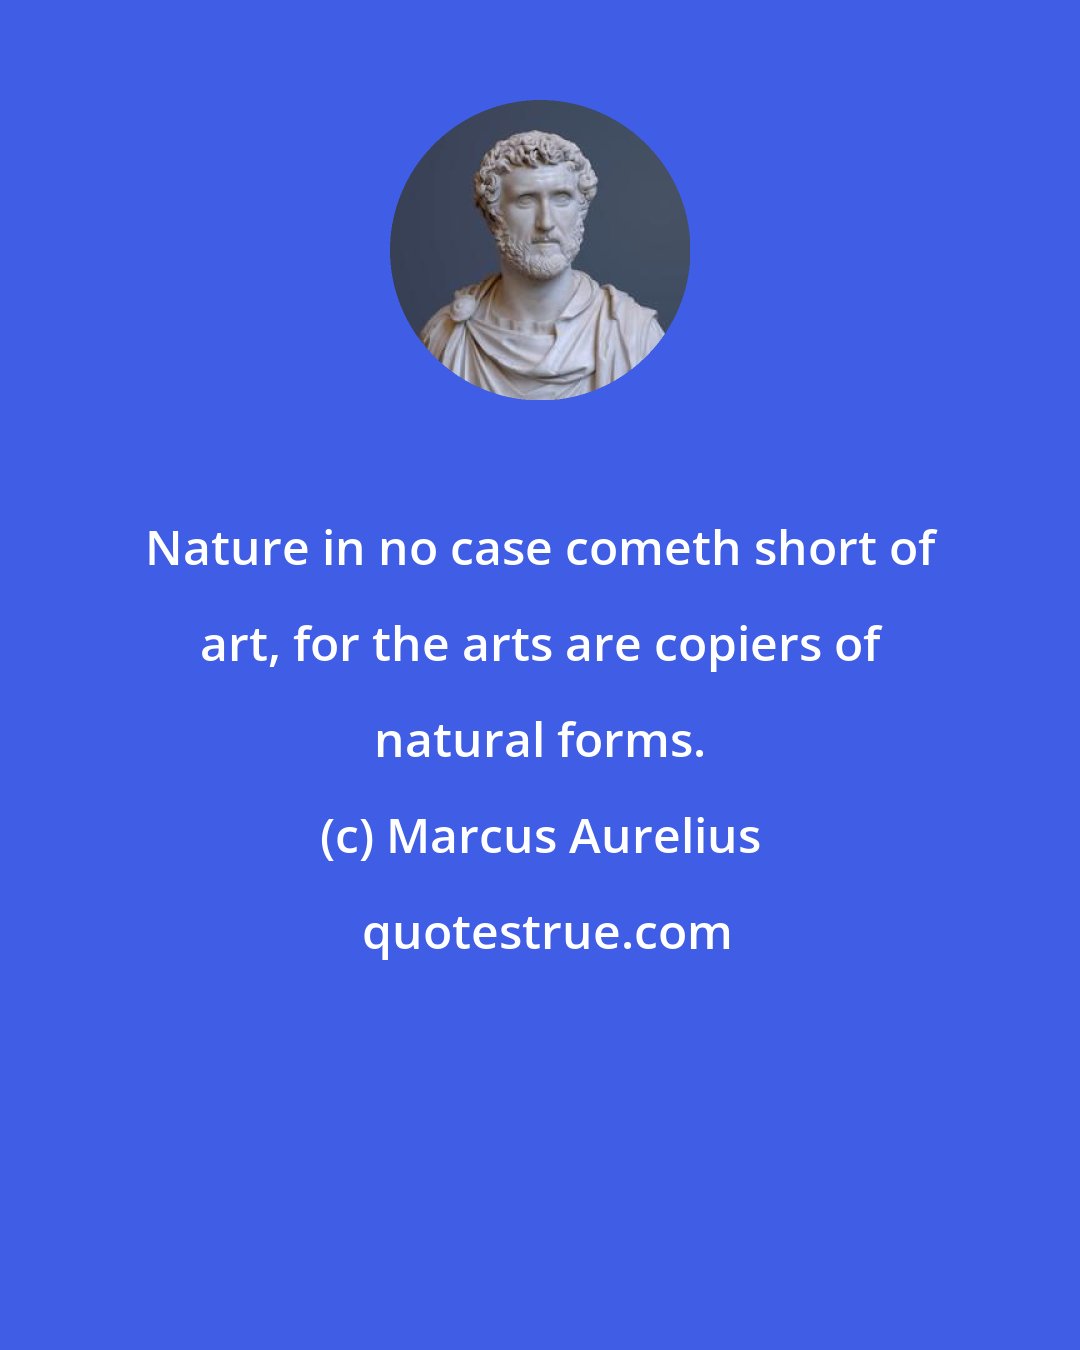 Marcus Aurelius: Nature in no case cometh short of art, for the arts are copiers of natural forms.